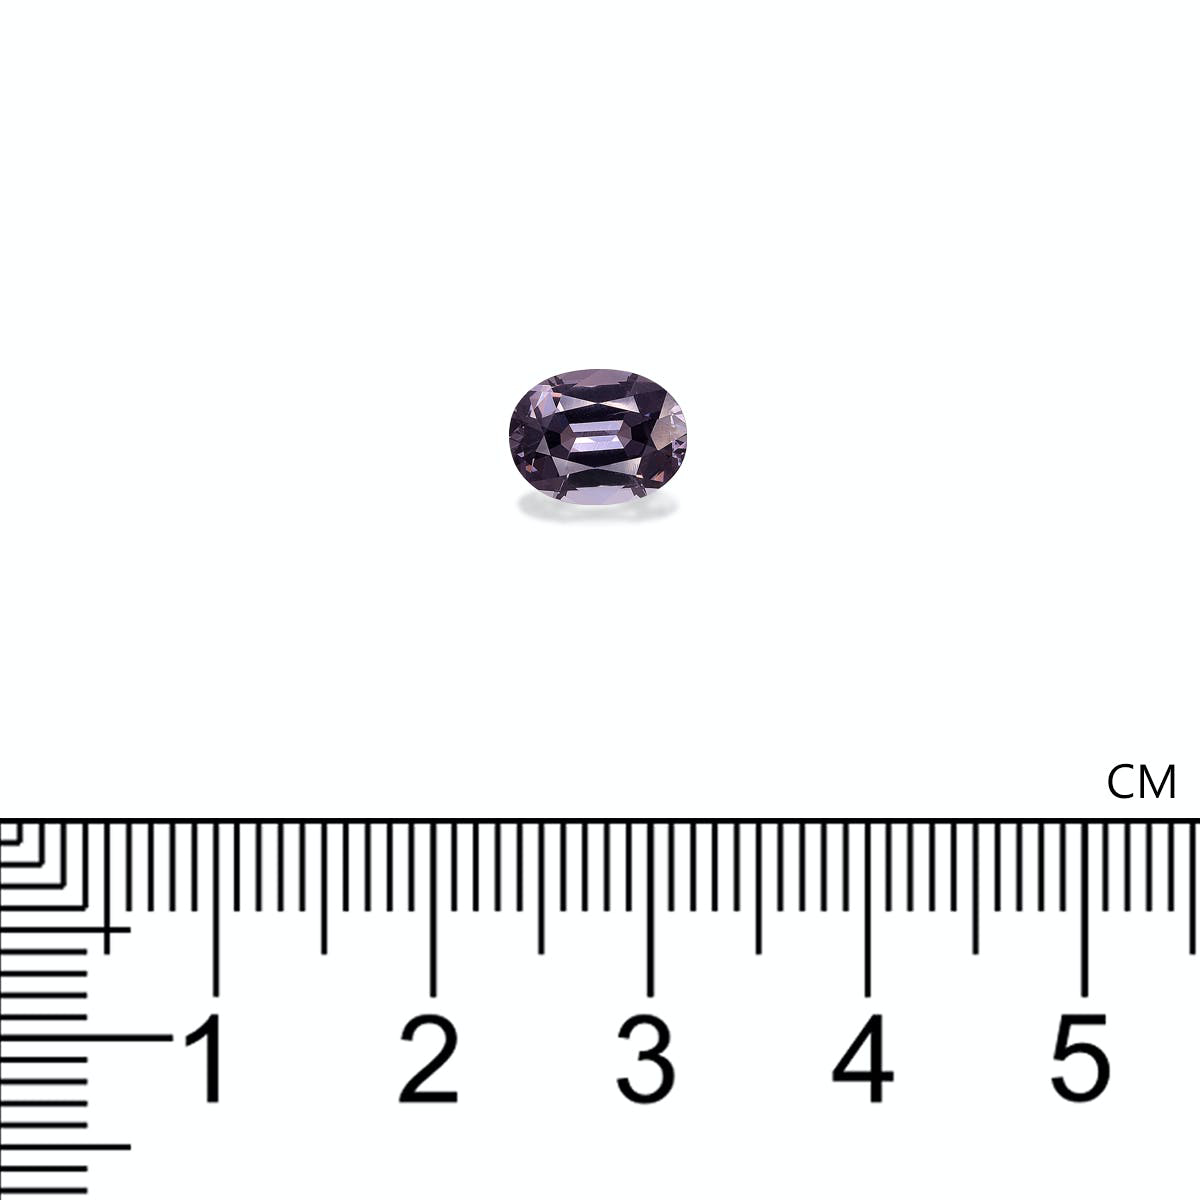 Picture of Metallic Grey Spinel 1.60ct - 8x6mm (SP0311)